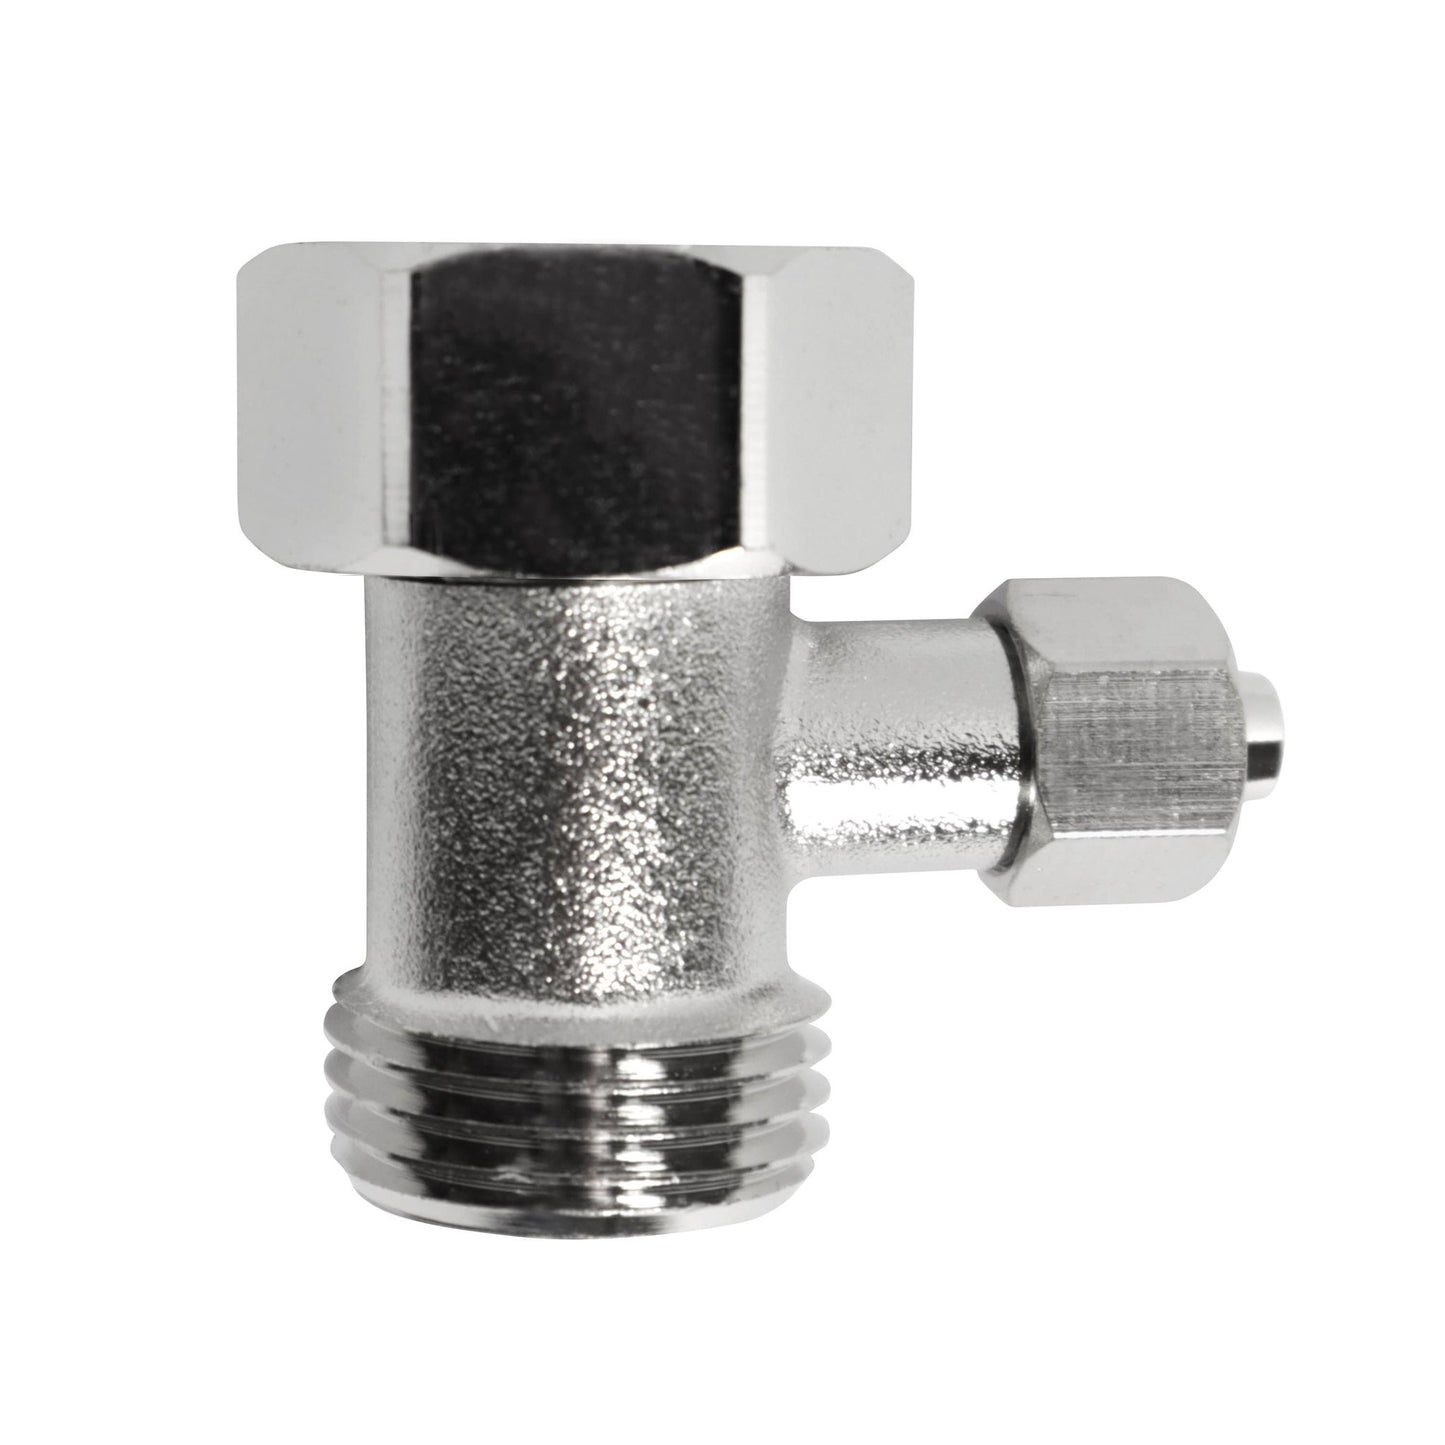 1/2" Hot Water Metal T-Adapter, side view